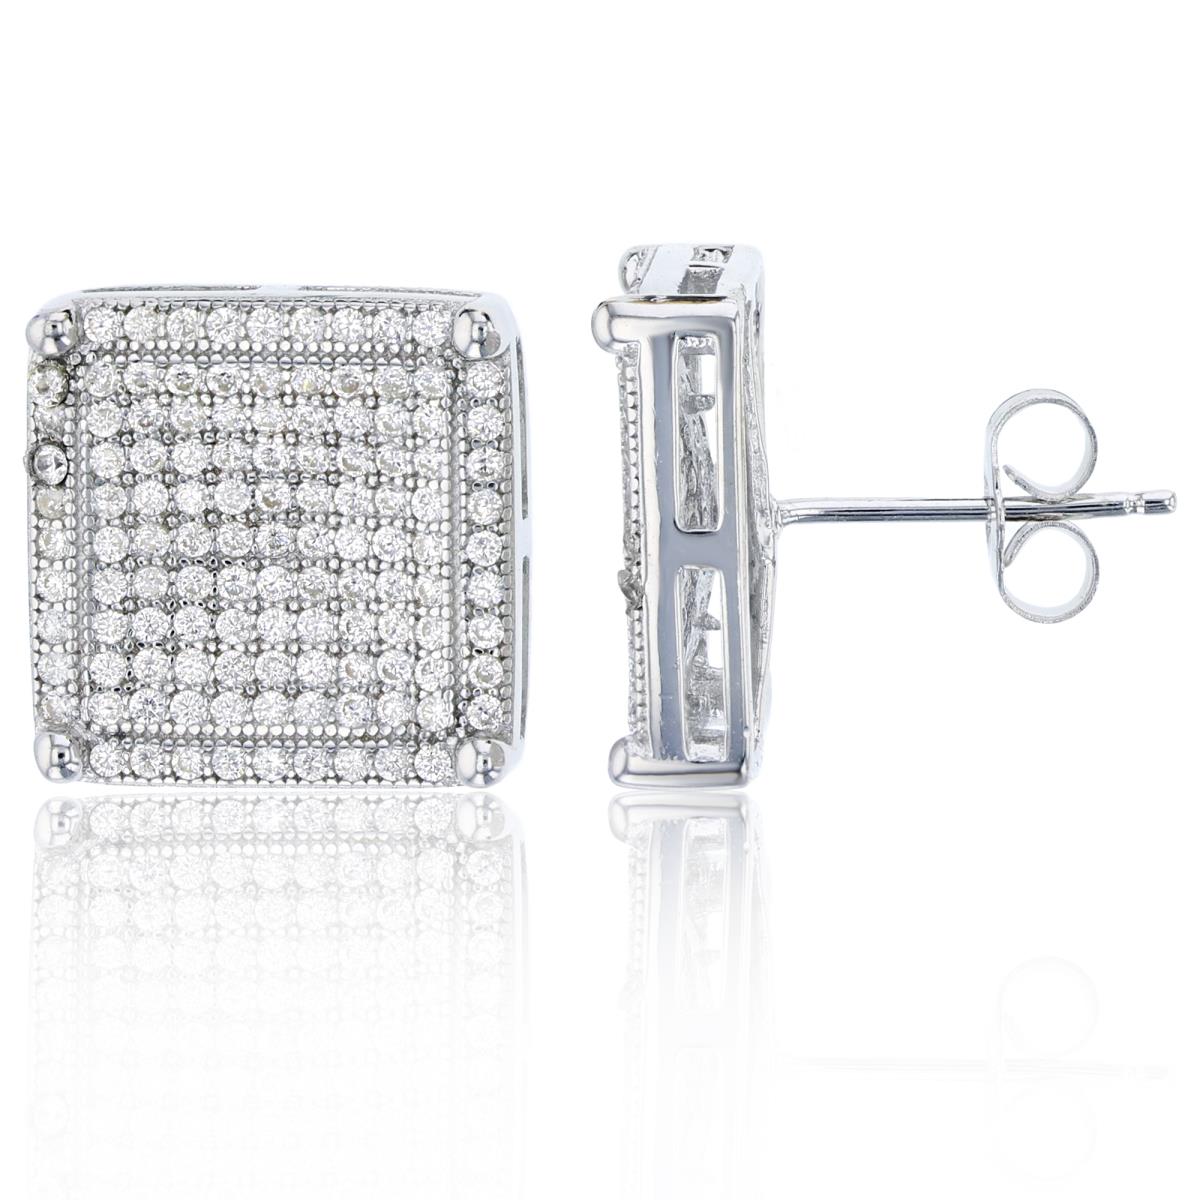 Sterling Silver 15x15 Micropave Square Stud Earring